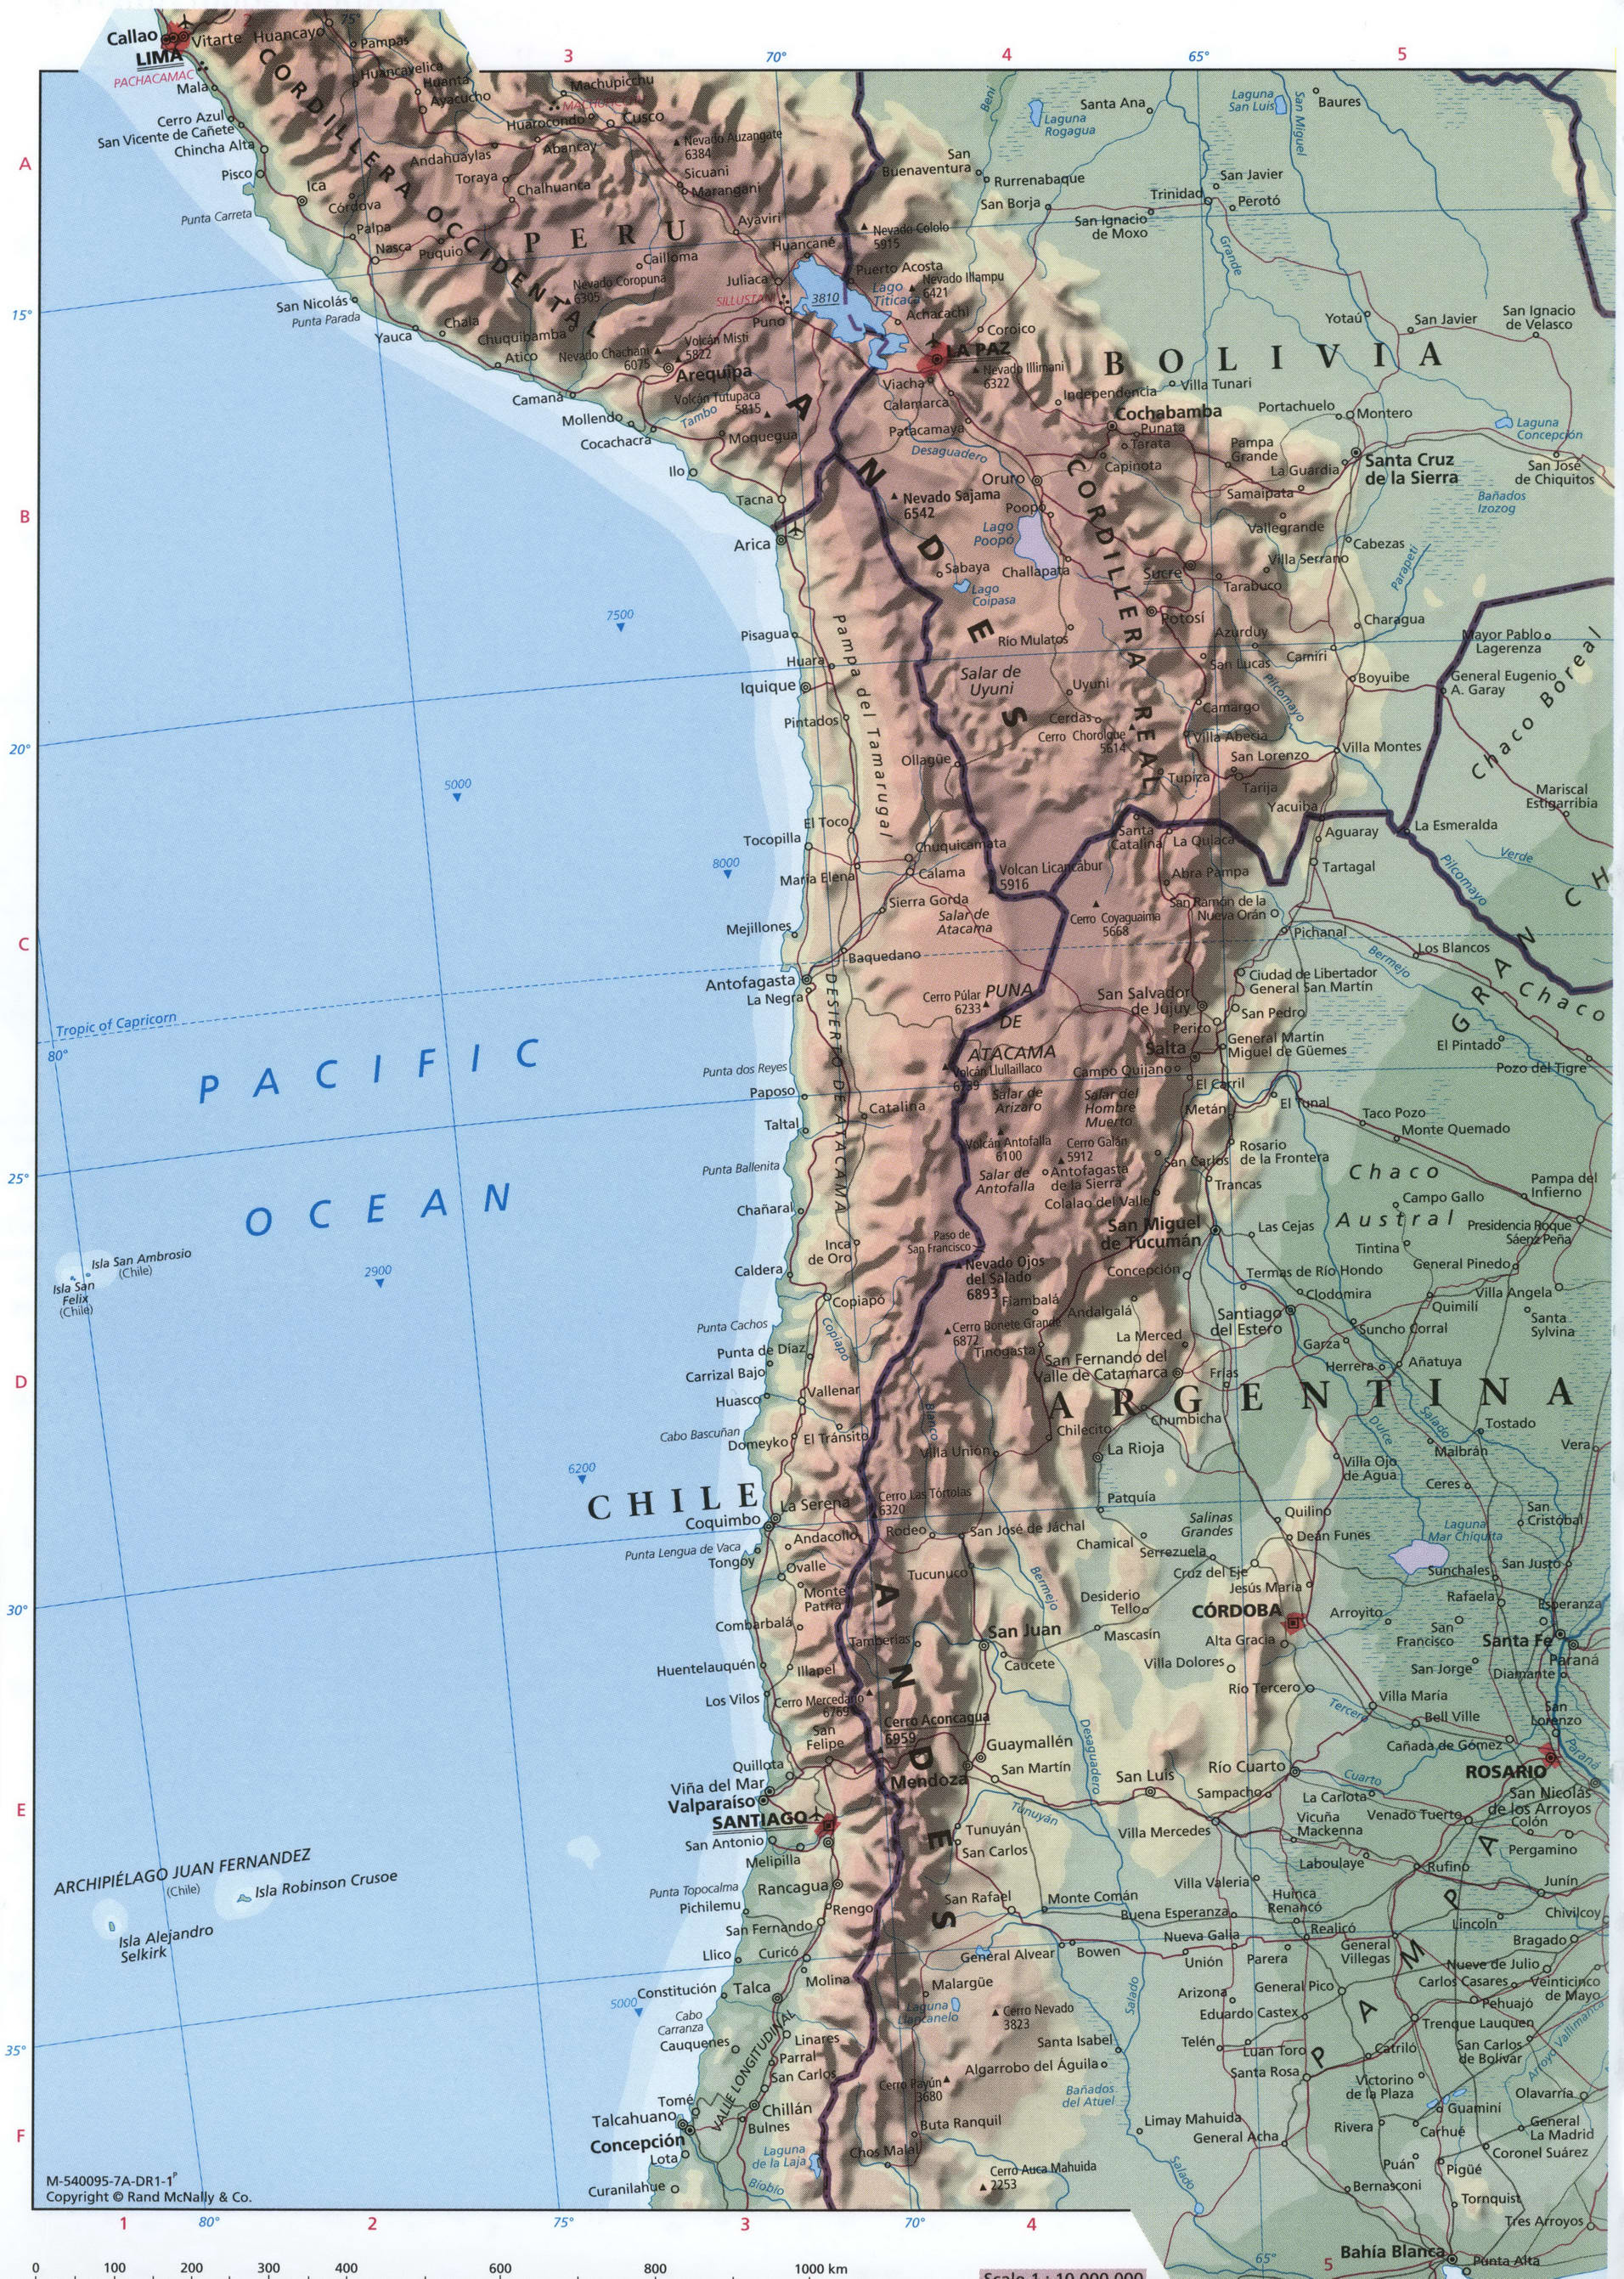 Central South America map - western part